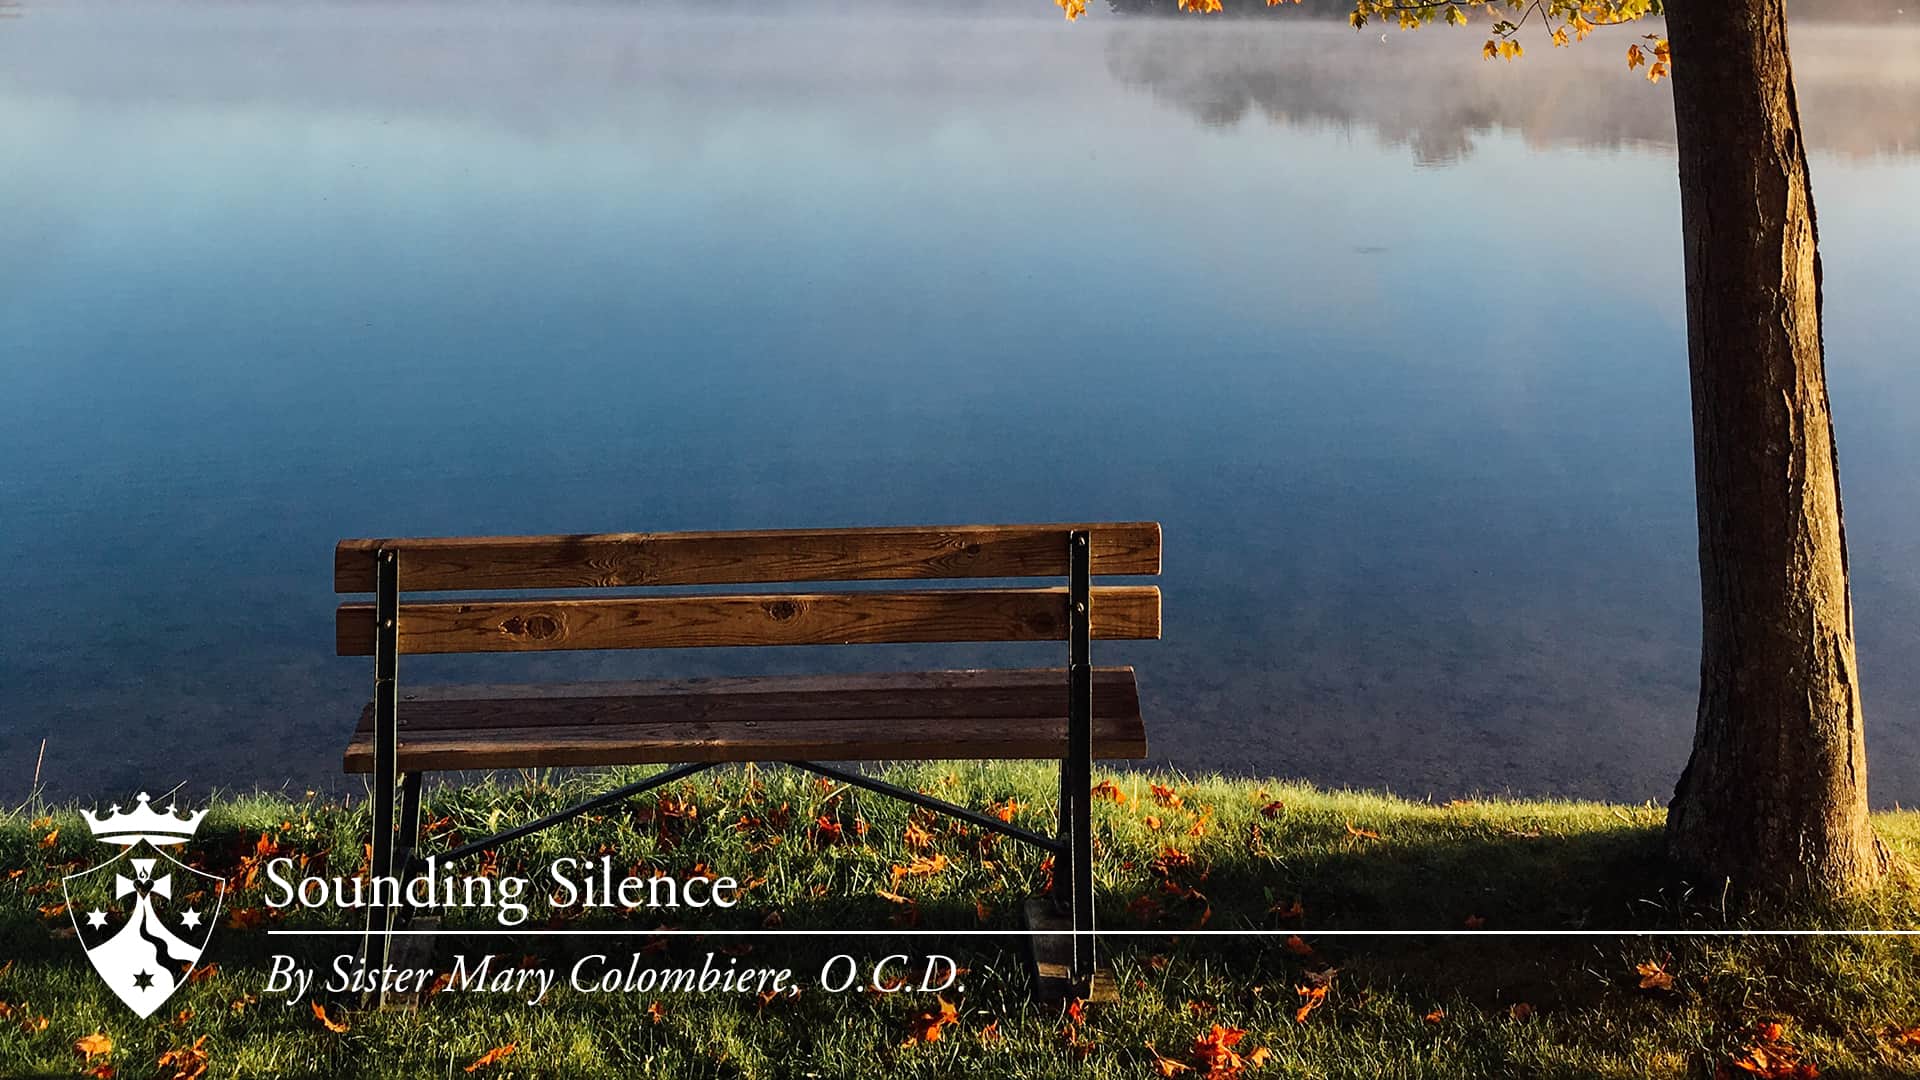 bench by the water, 'Sounding Silence, by Sister Mary Colombiere, O.C.D.'